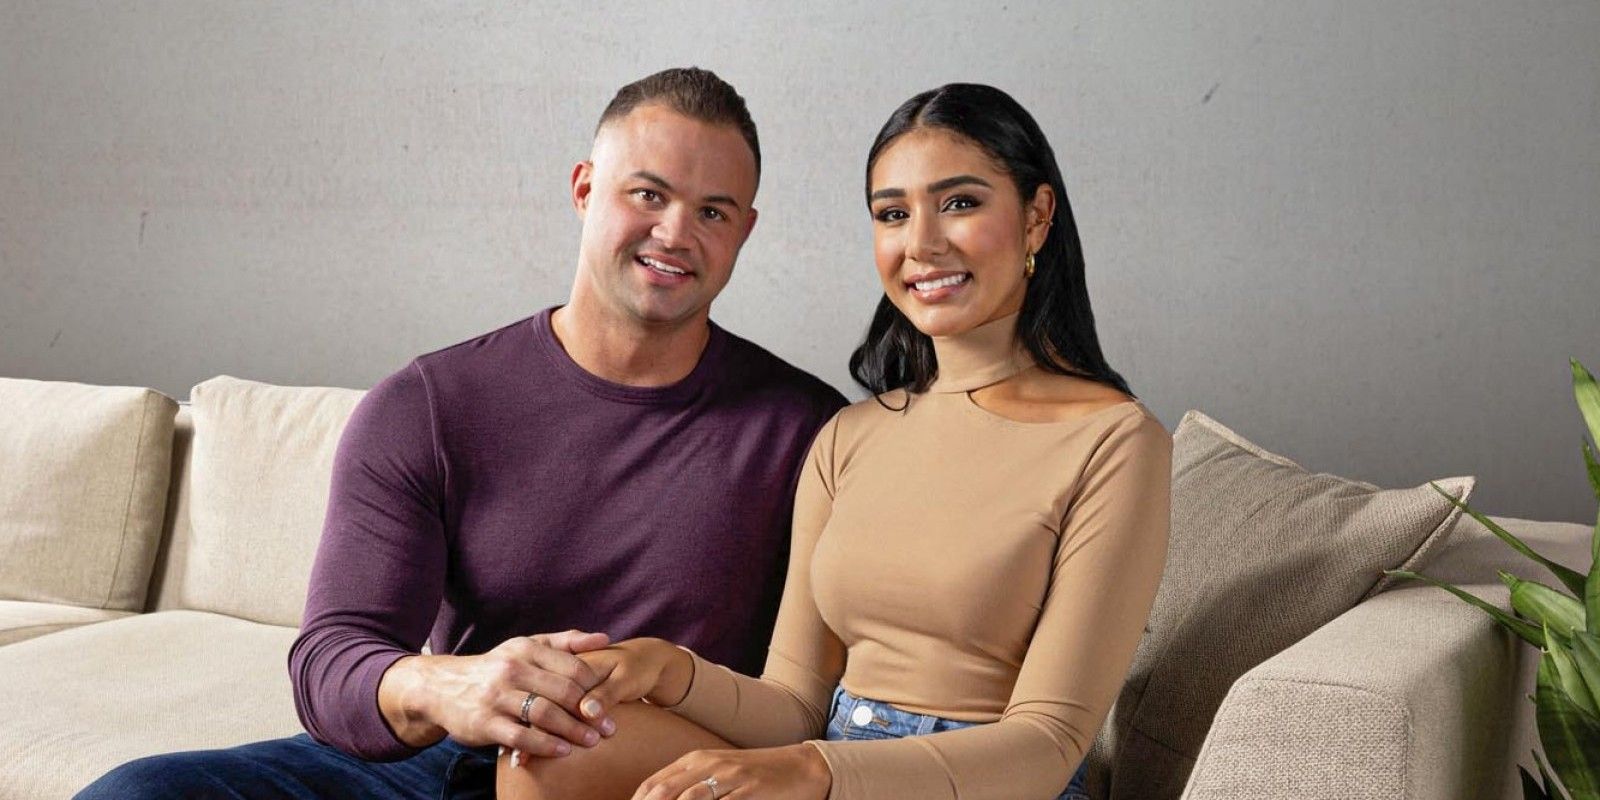 Patrick Mendes and Thaís Ramone from 90 Day Fiancé season 9